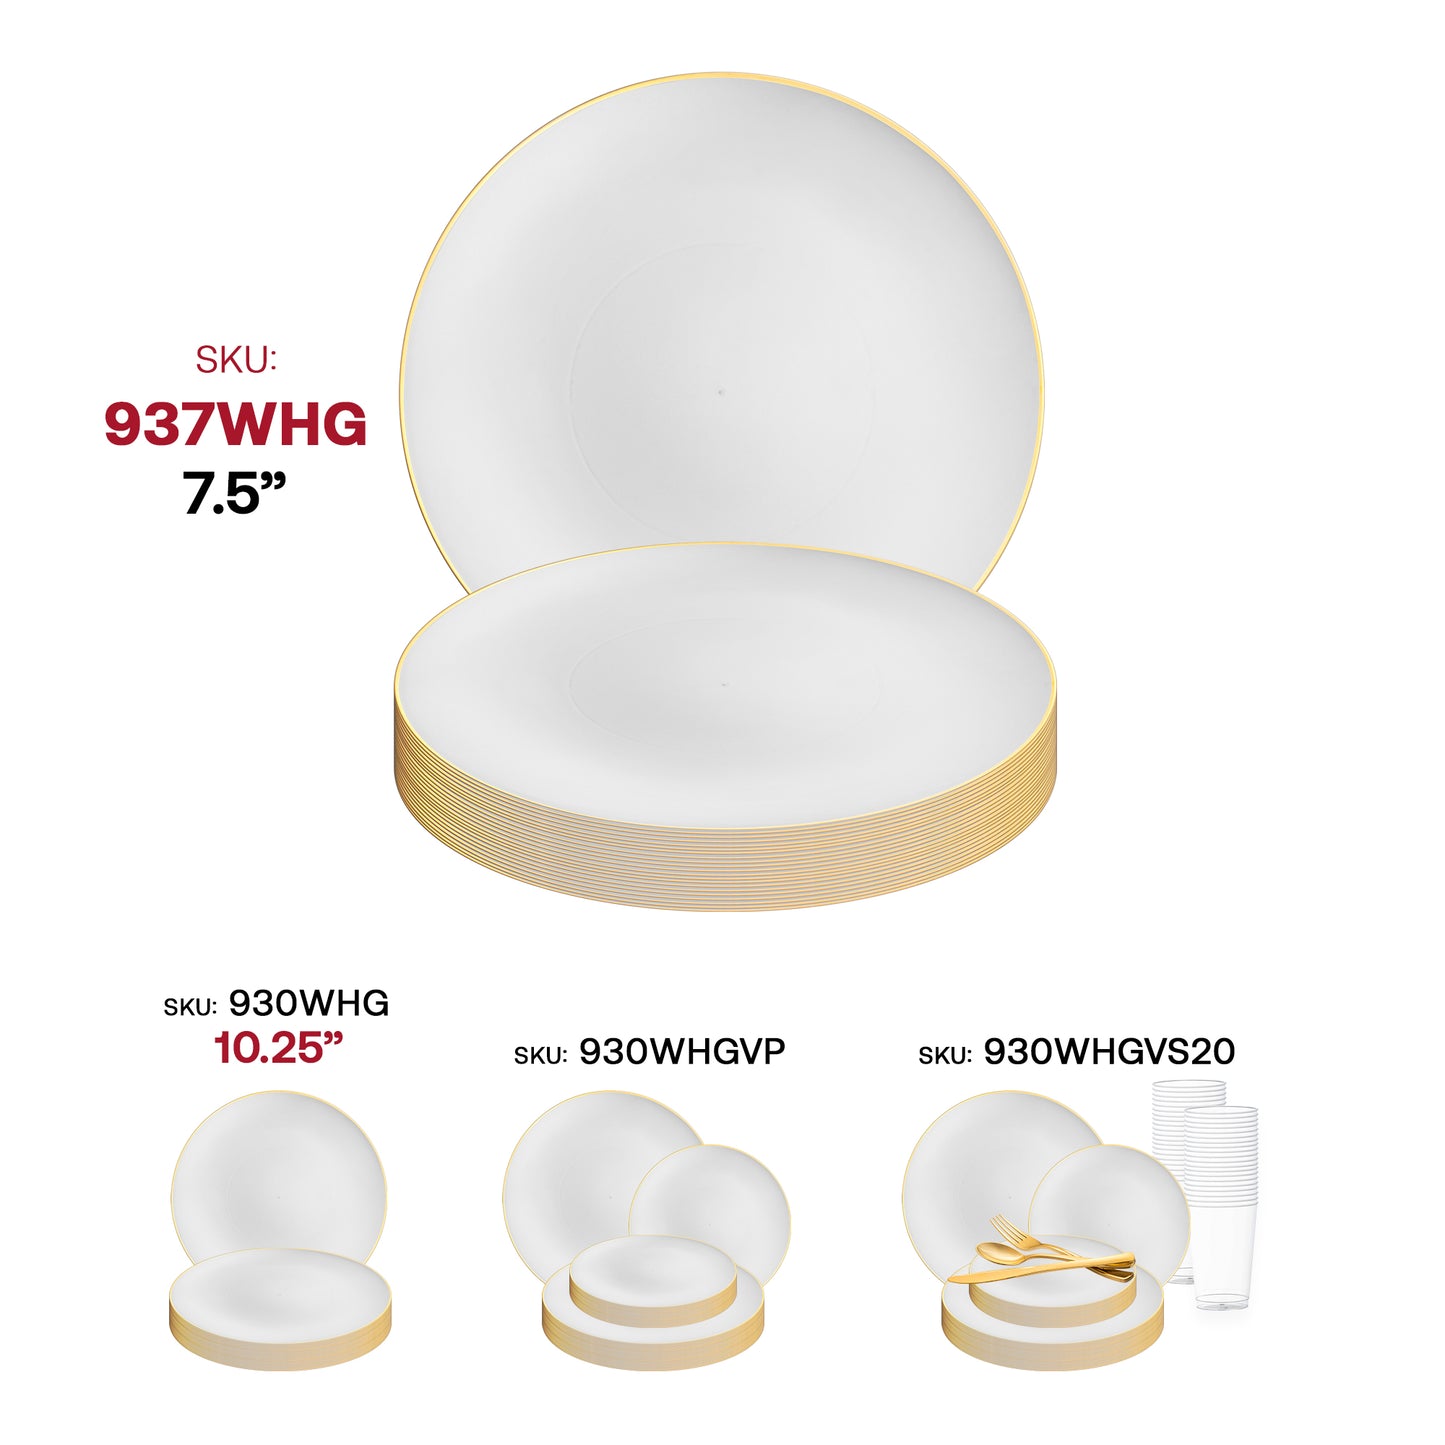 White with Gold Rim Organic Round Disposable Plastic Appetizer/Salad Plates (7.5") SKU | The Kaya Collection